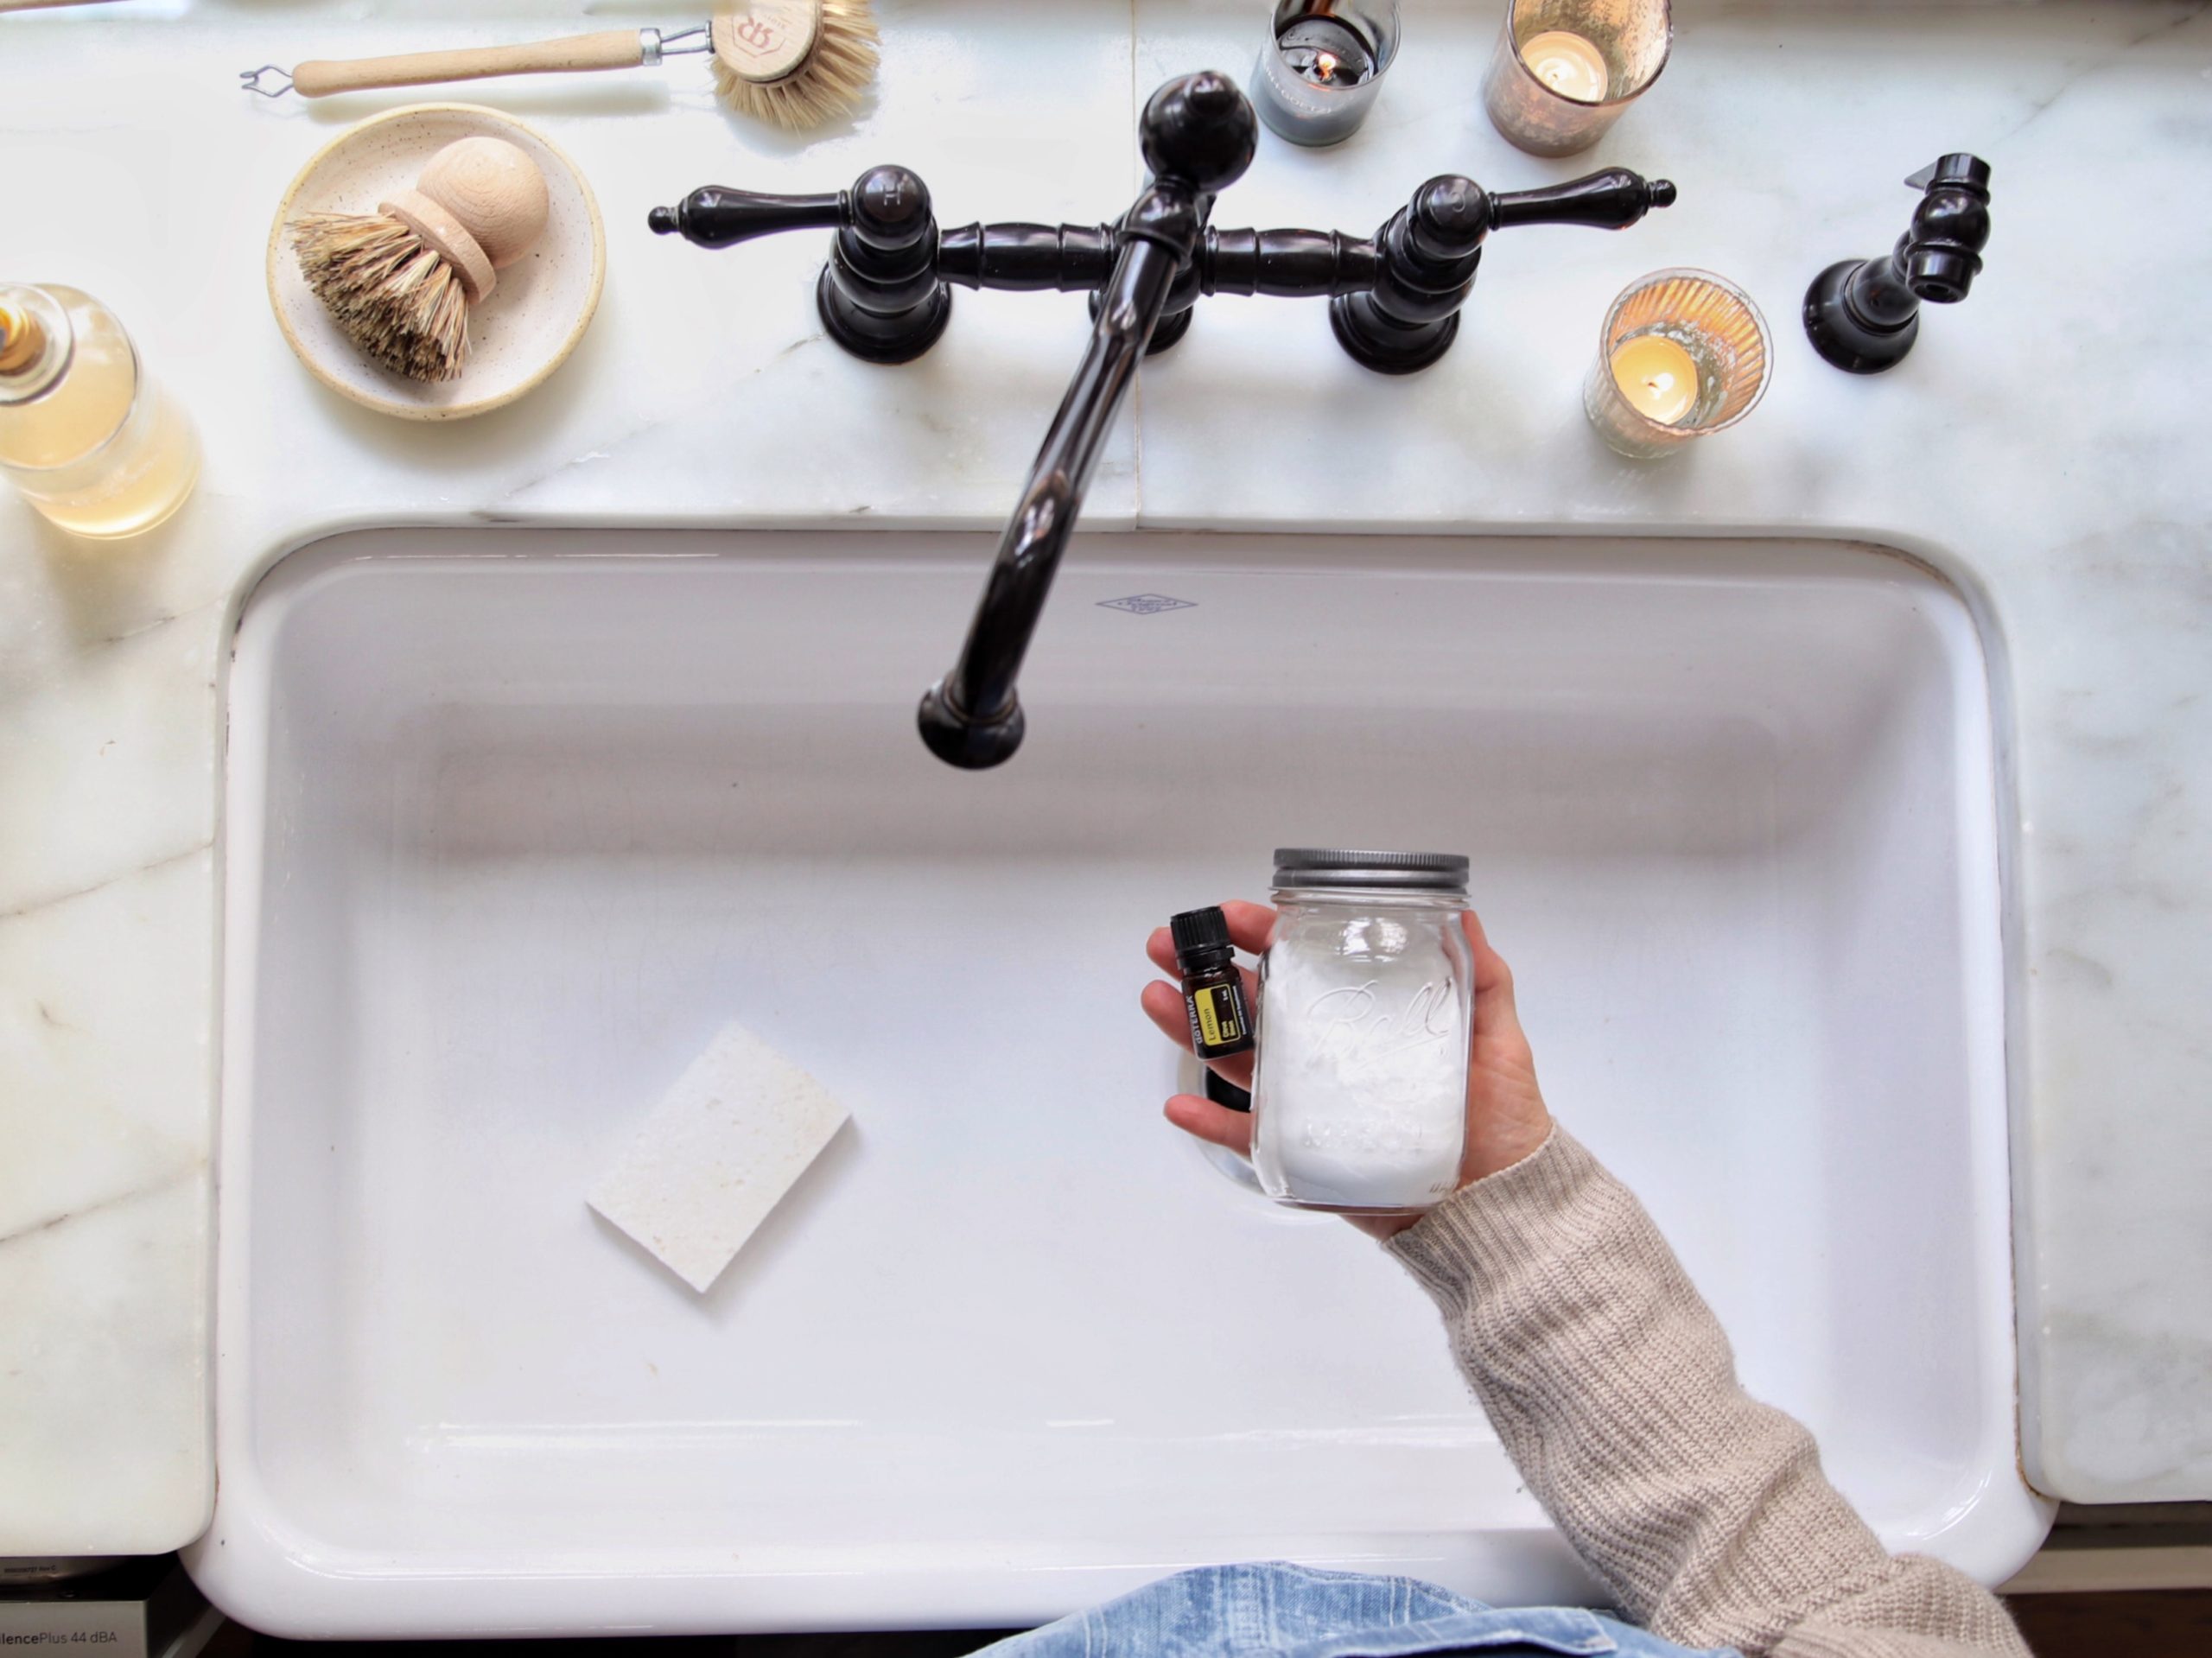 how to remove sink stains without bleach #naturalcleaning #removingsinkstainswithoutbleach #bleachalternatives #nontoxiccleaning